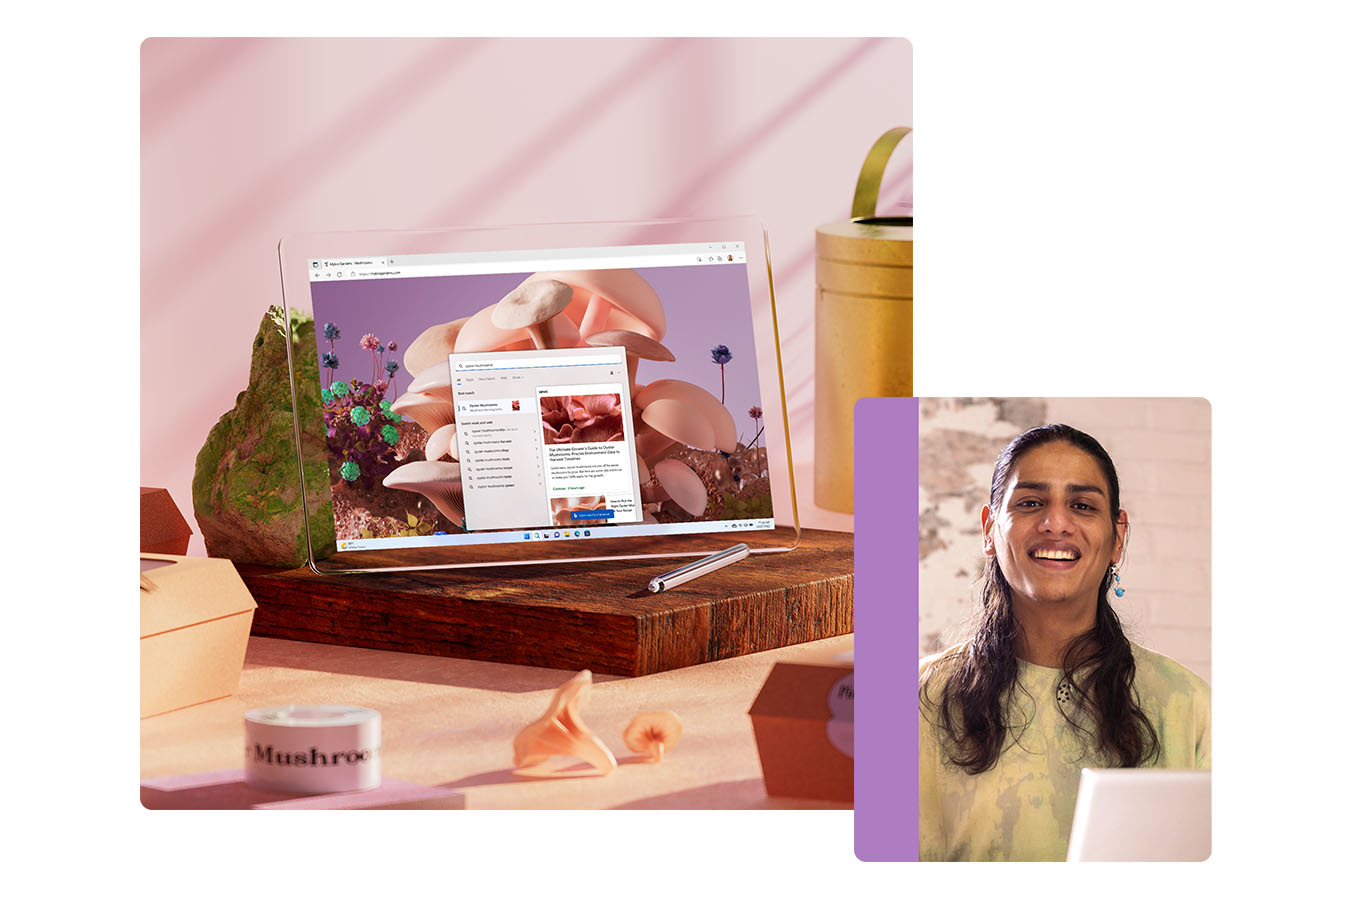 Open PC sitting on a wooden block with woman smiling